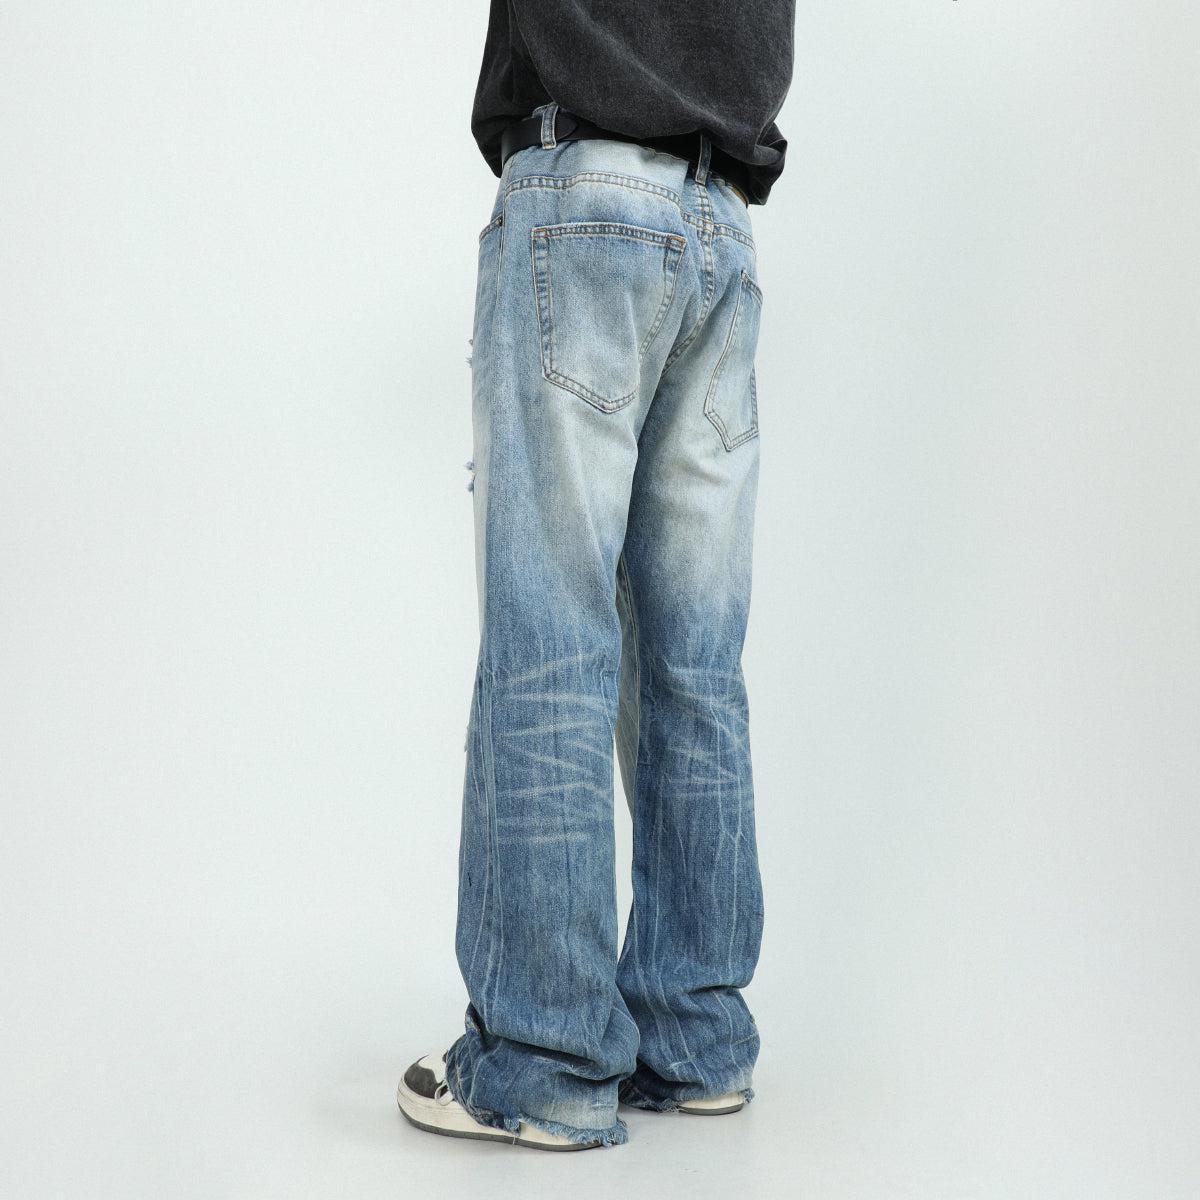 Washed Ripped Jeans Korean Street Fashion Jeans By Mr Nearly Shop Online at OH Vault